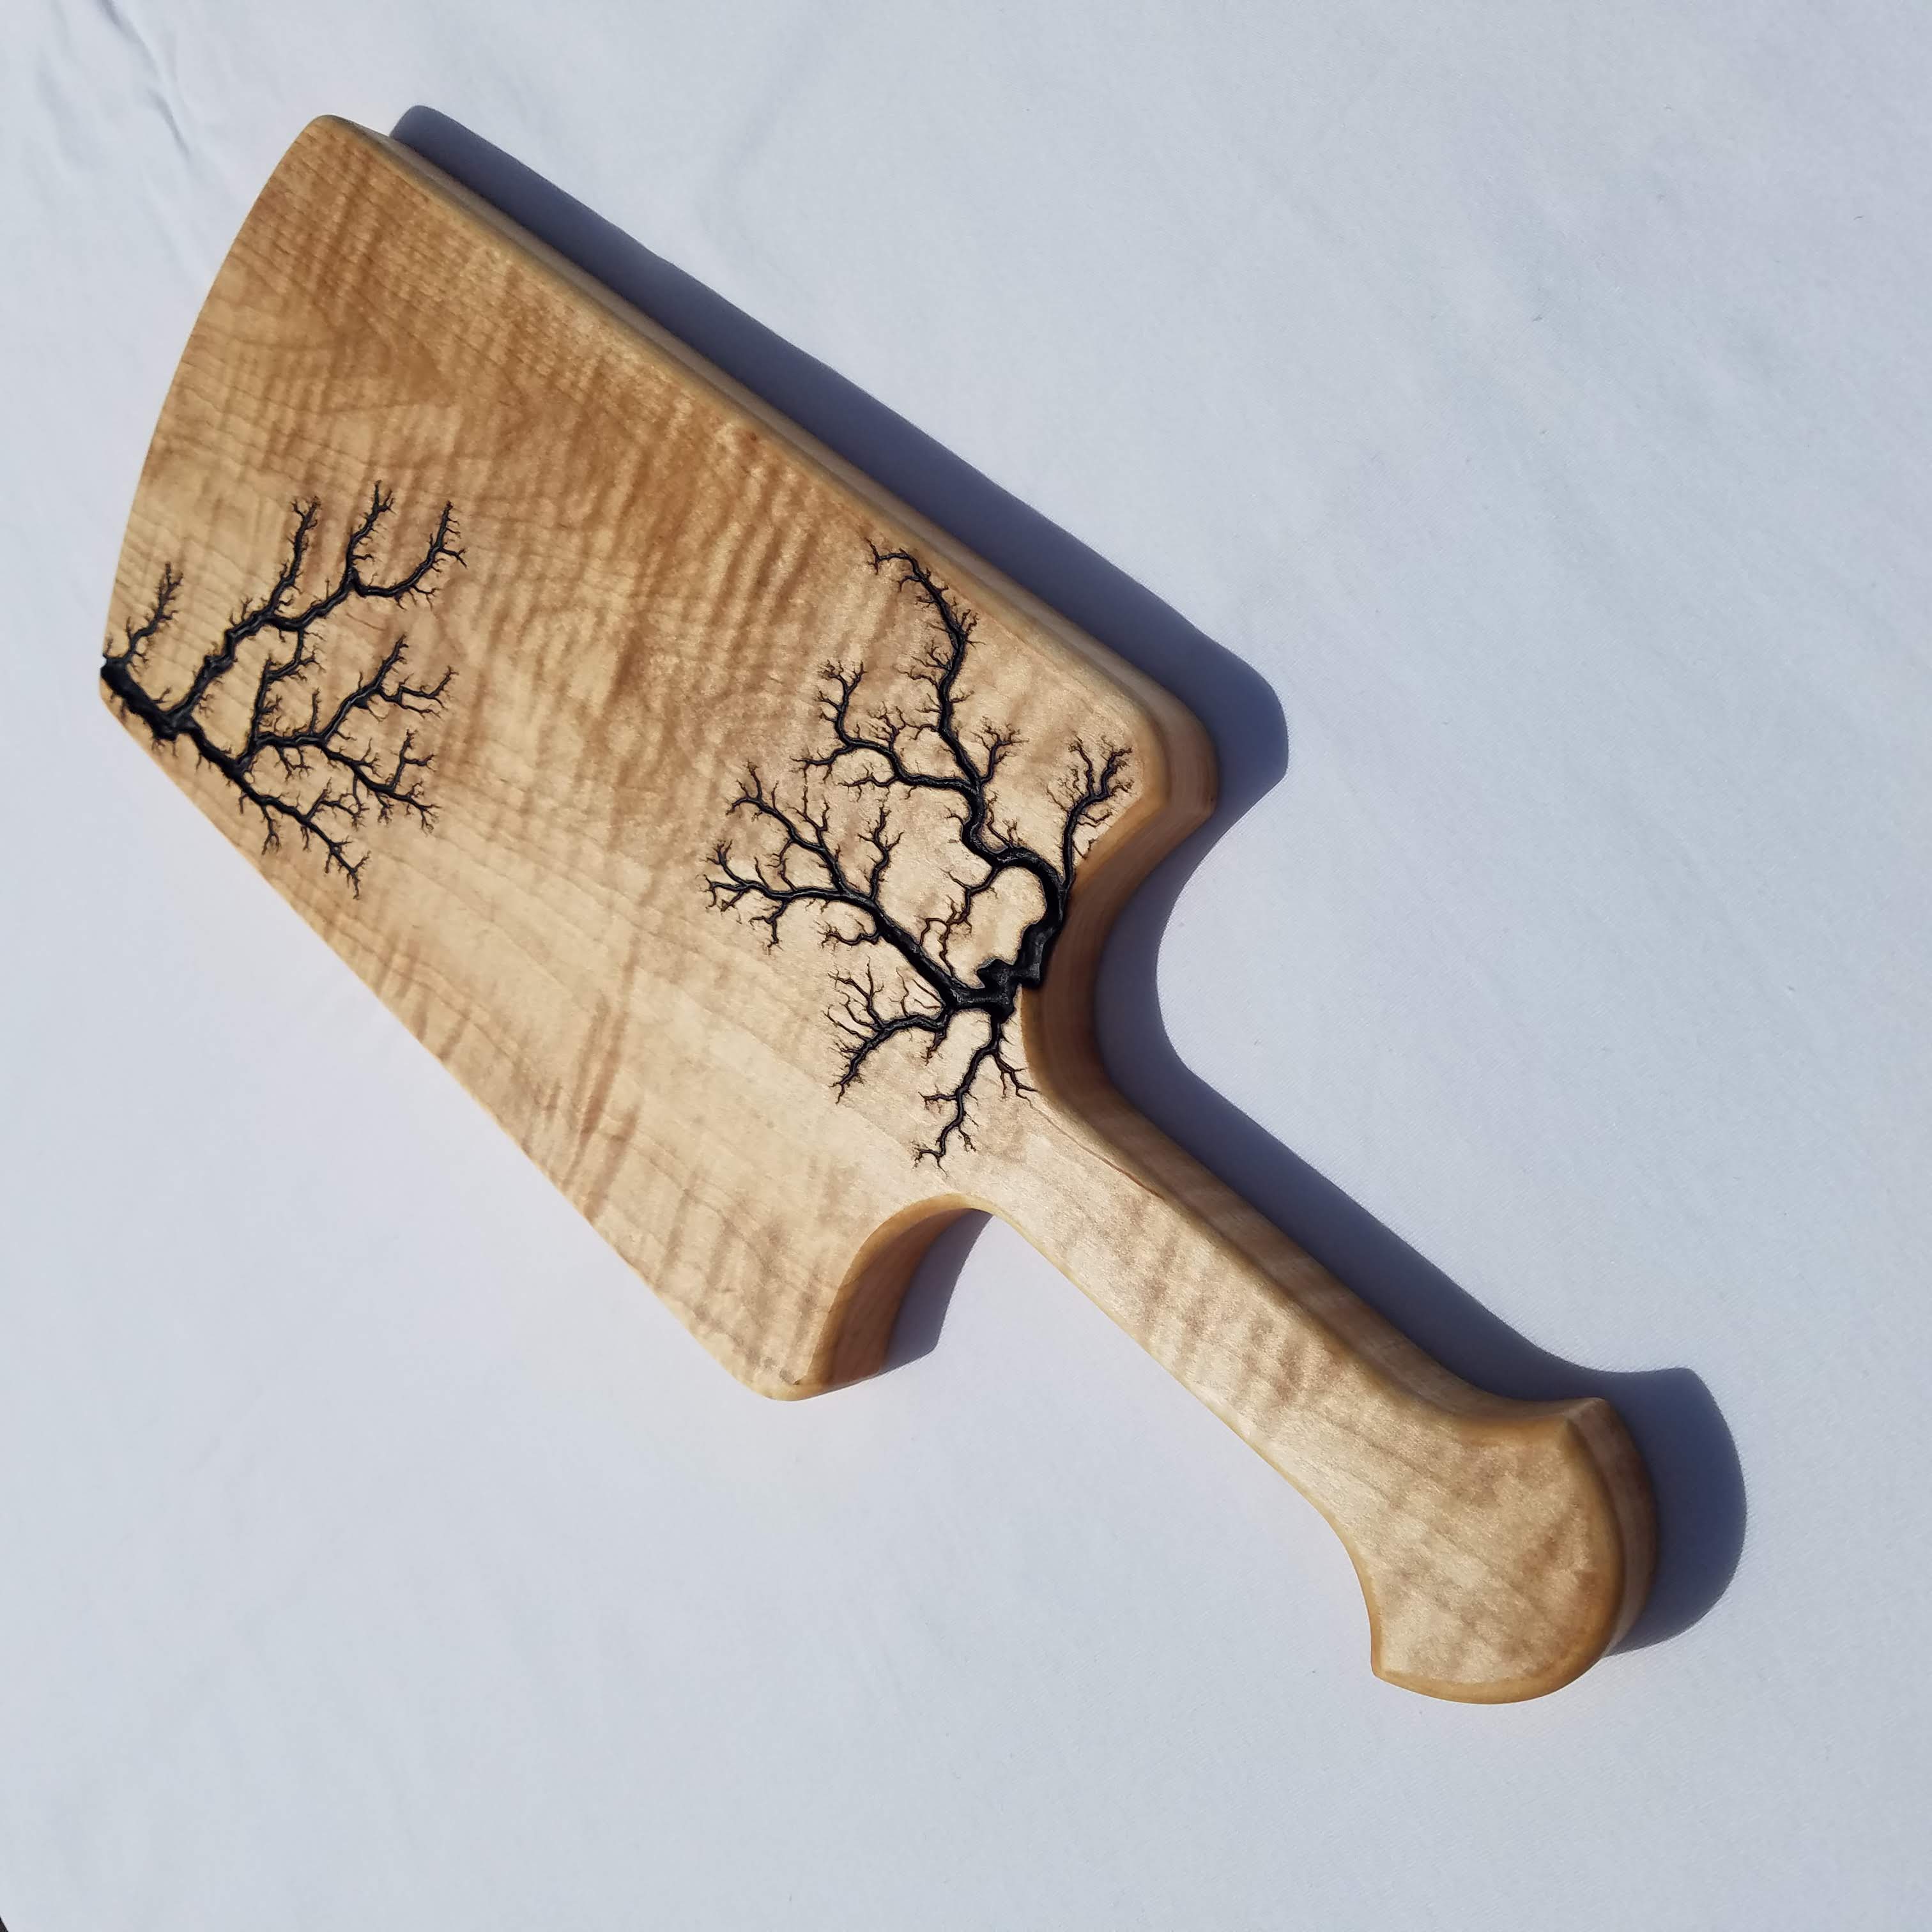 Curly Maple Serving Board "Snackscaliber"